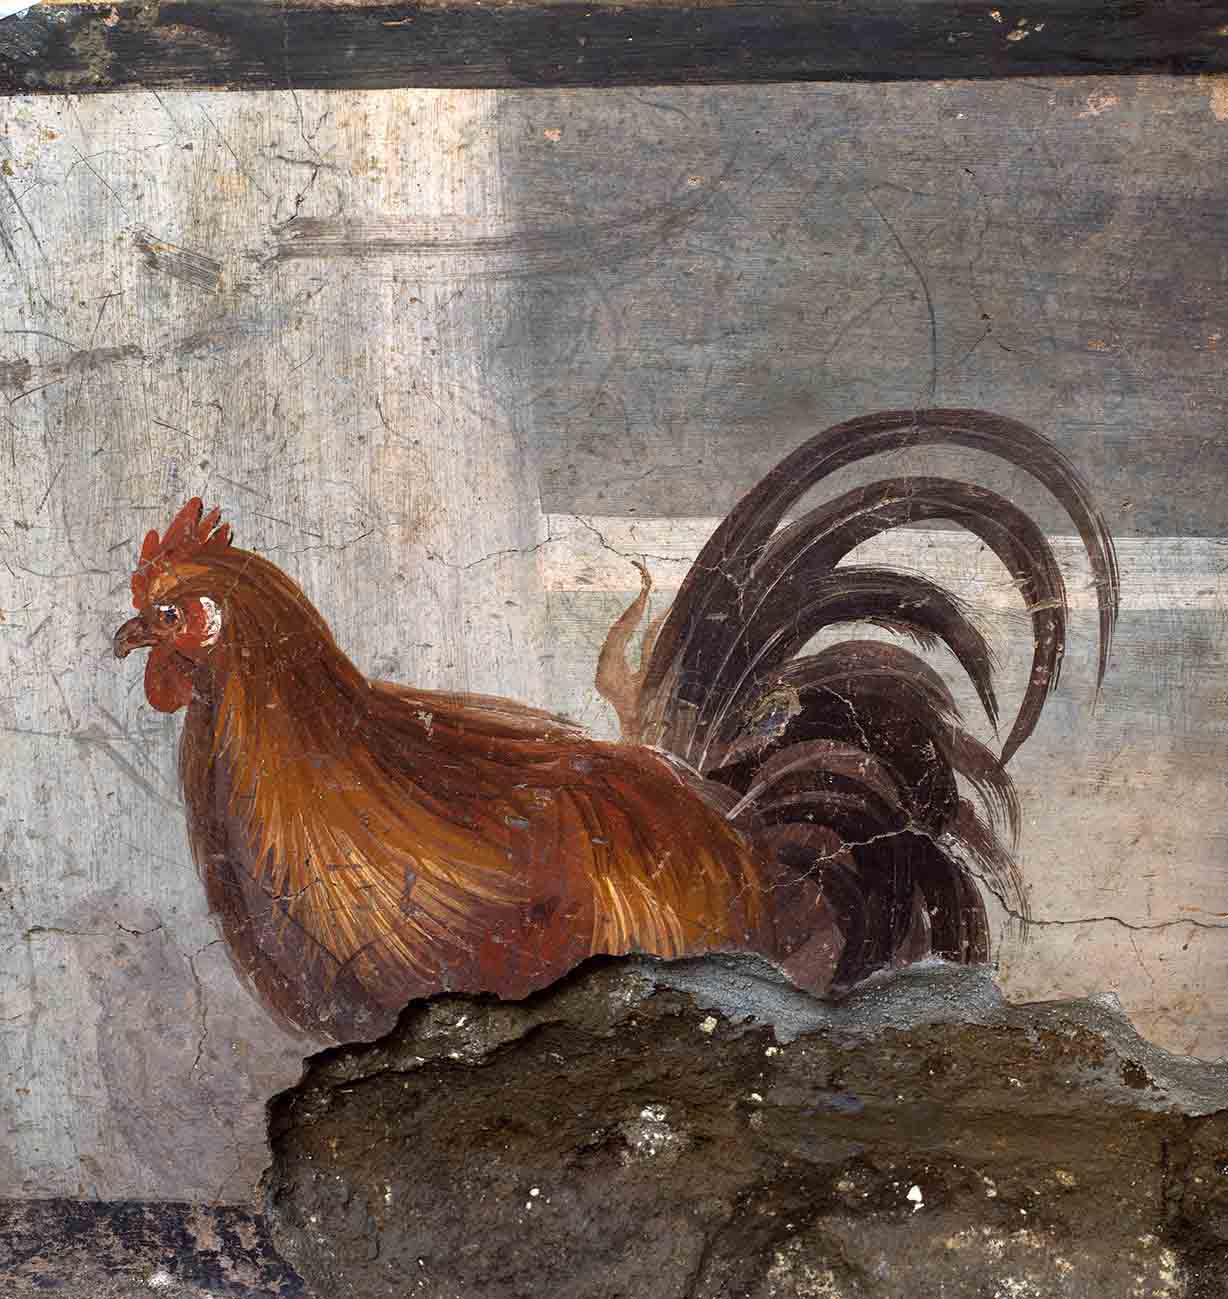 A highly realistic painting of a rooster decorates the soon to reopen Pompeii food stall, located in the Regio V site area. (Pompeii Archaeological Park)